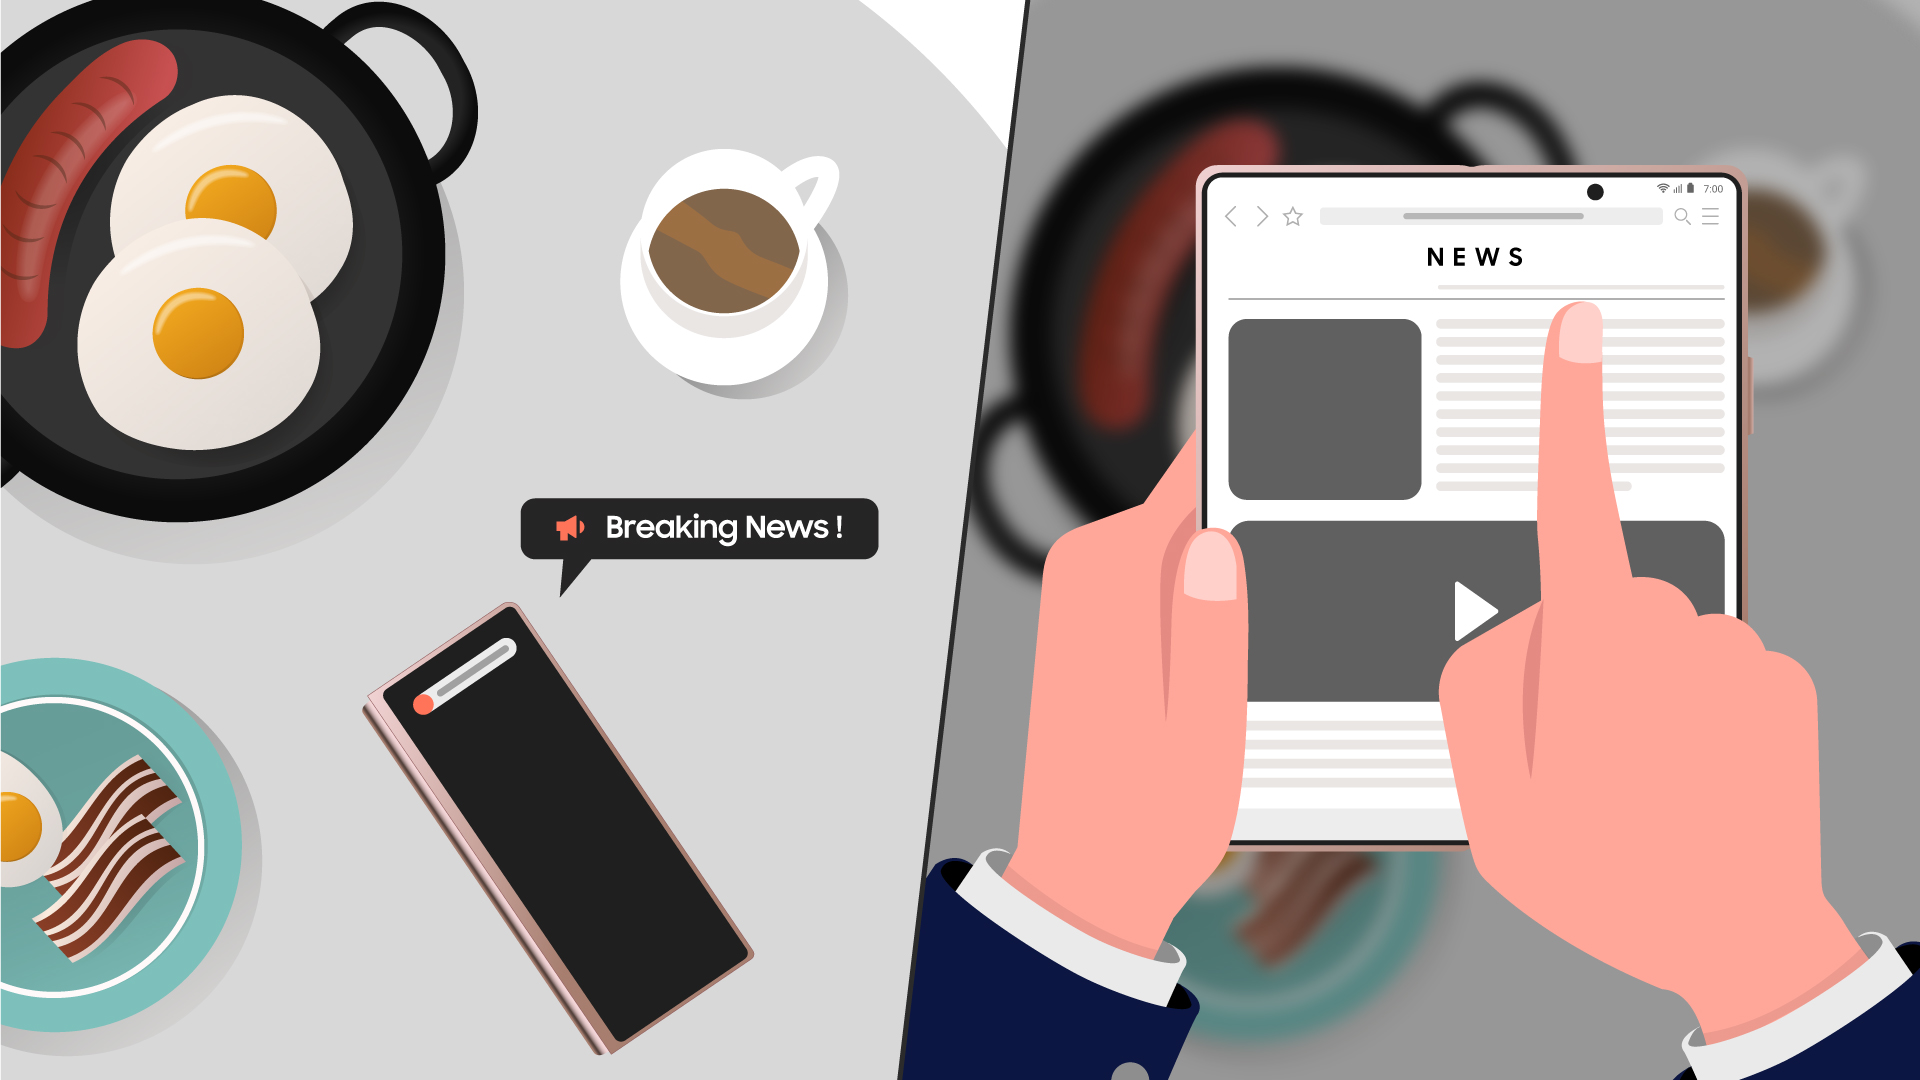 An illustration split into two panels the left panel is showing a Galaxy Z Fold2 placed on a table alongside a cup of coffee and breakfast dishes while the right panel is showing a person's hand hovering over the Galaxy Z Fold2's main screen